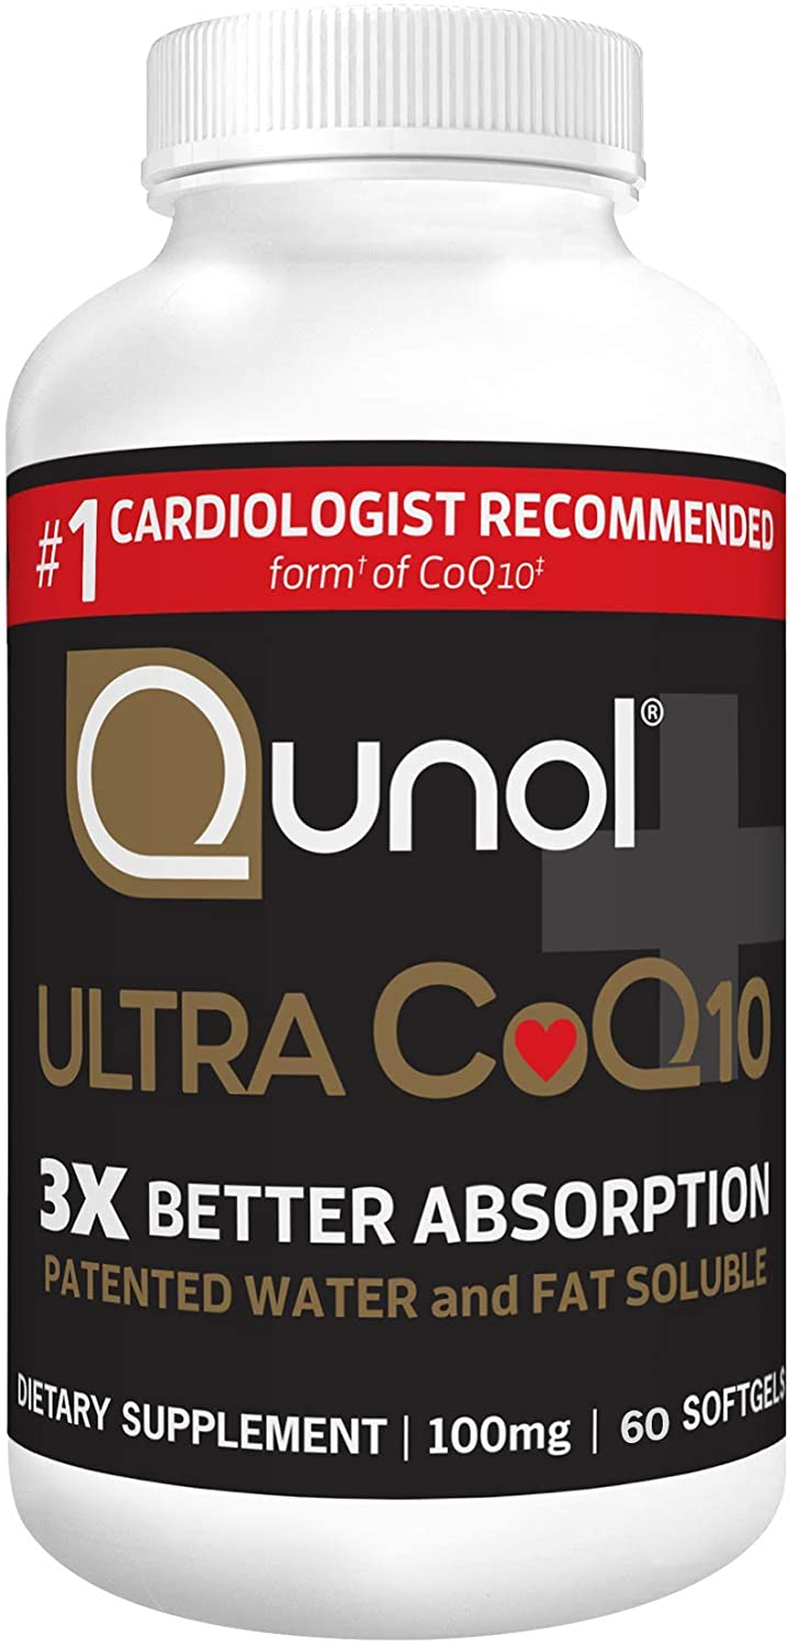 Ultra 100Mg Coq10, 3X Better Absorption, Patented Water and Fat Soluble Natural Supplement Form of Coenzyme Q10, Antioxidant for Heart Health, 60 Count Softgels